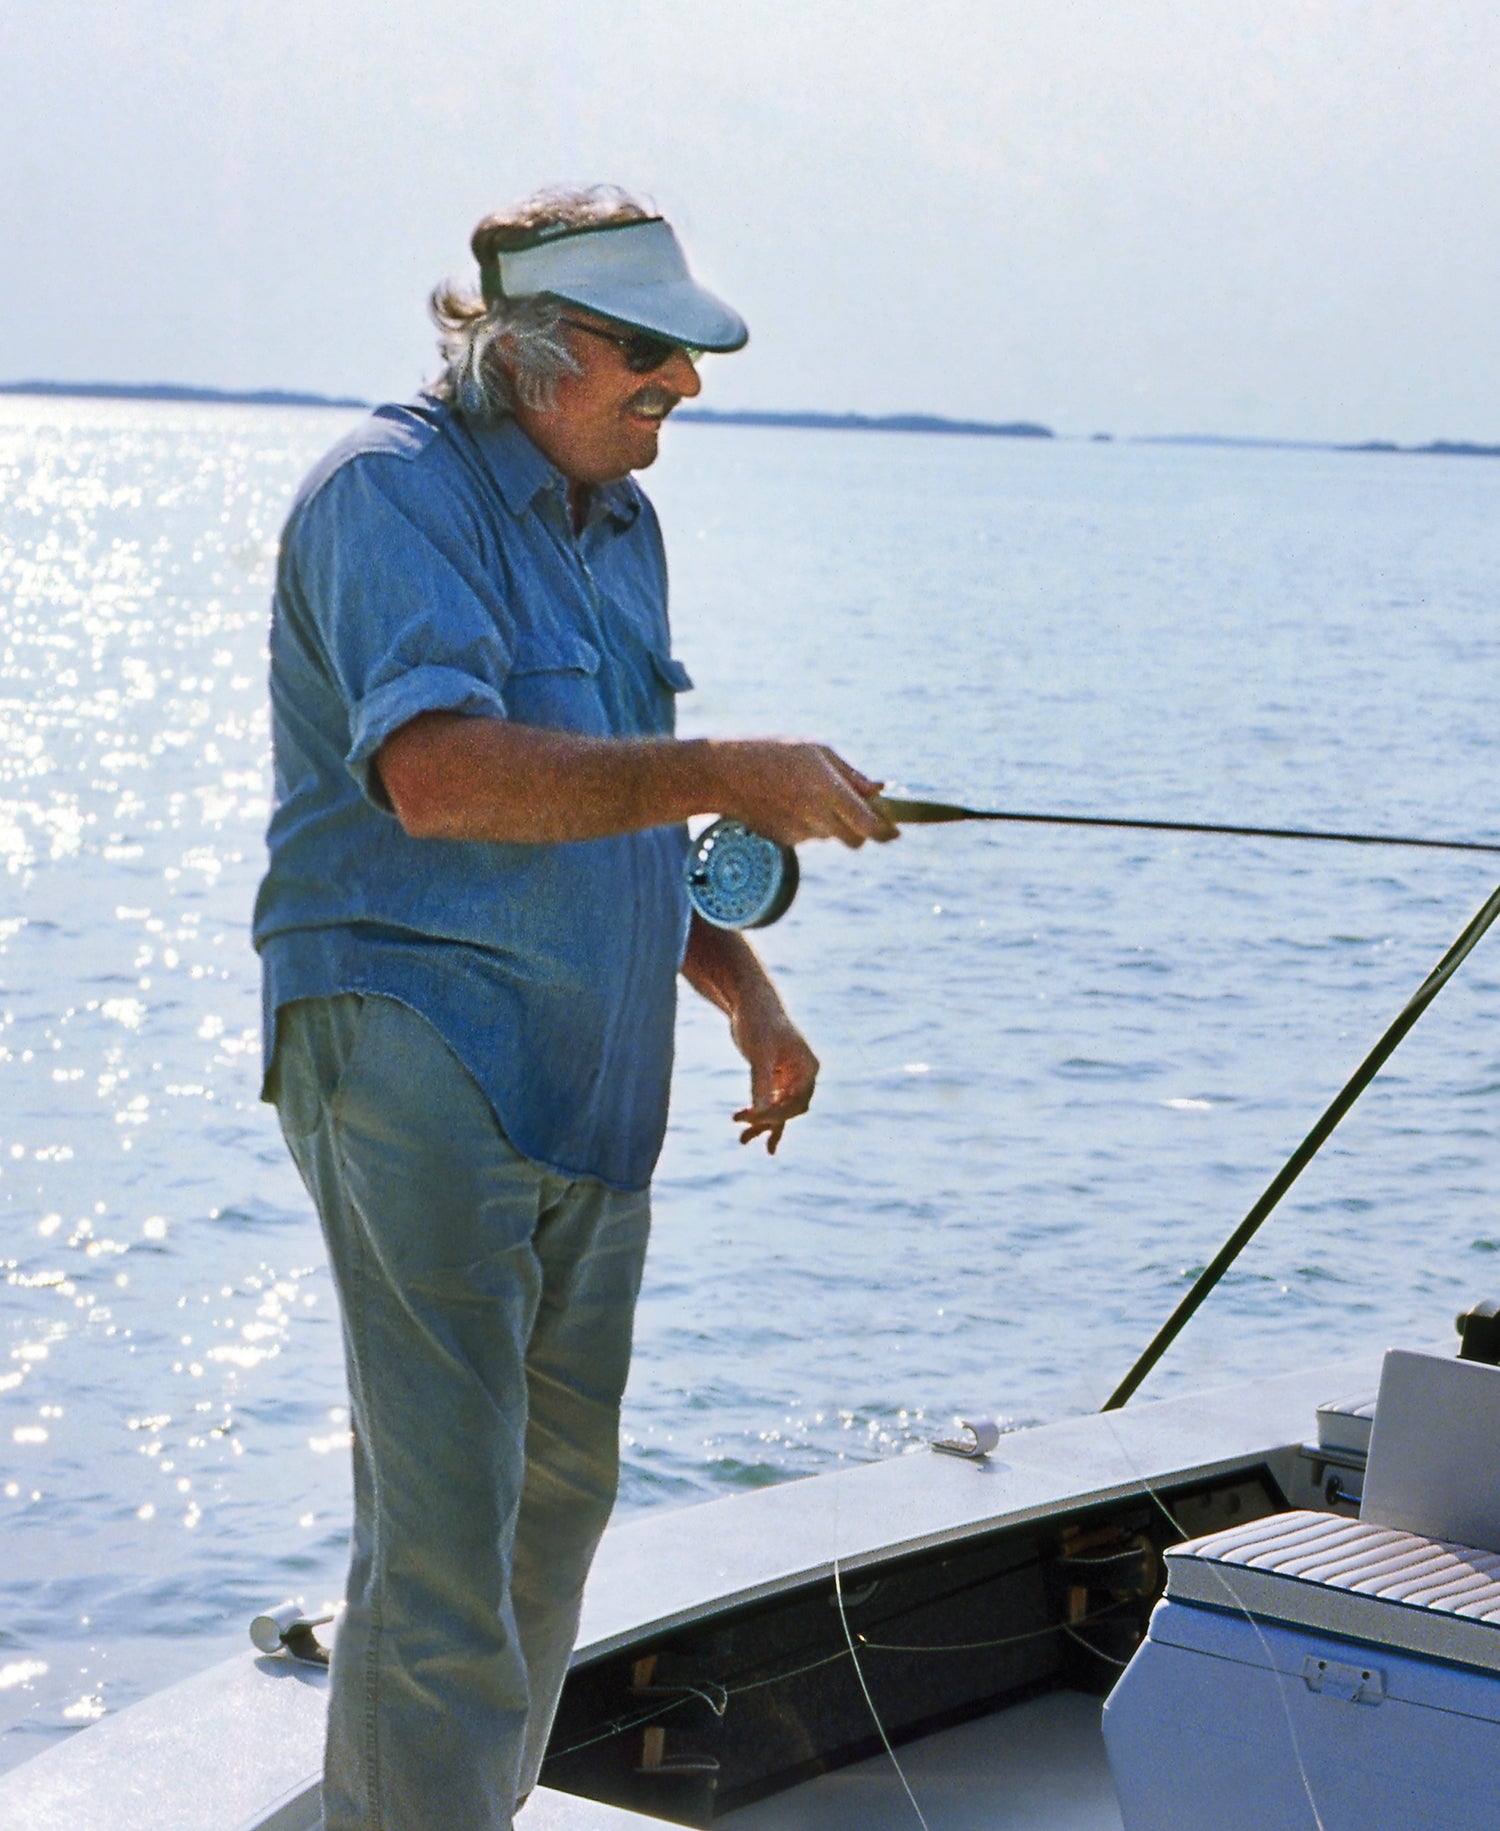 Standing on boat, Russell Chatham holds fly rod